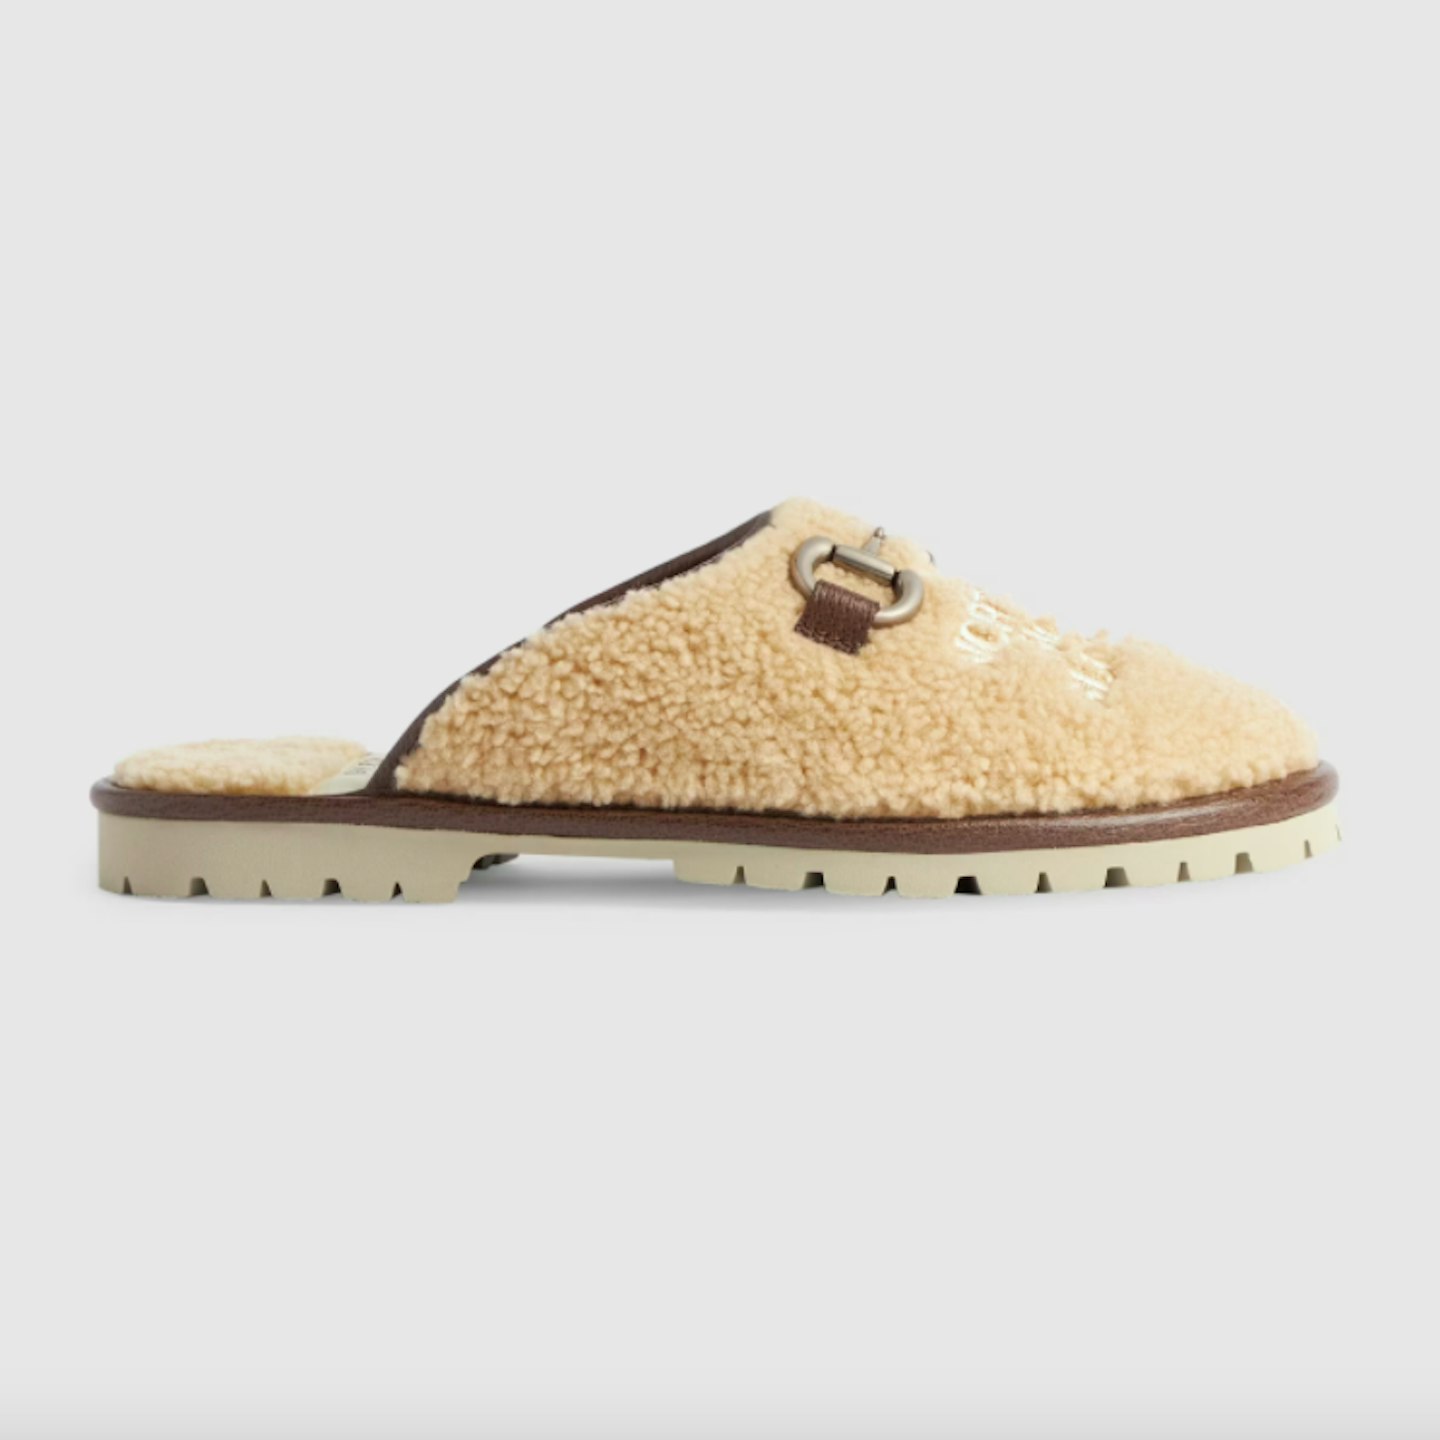 Slippers, £610